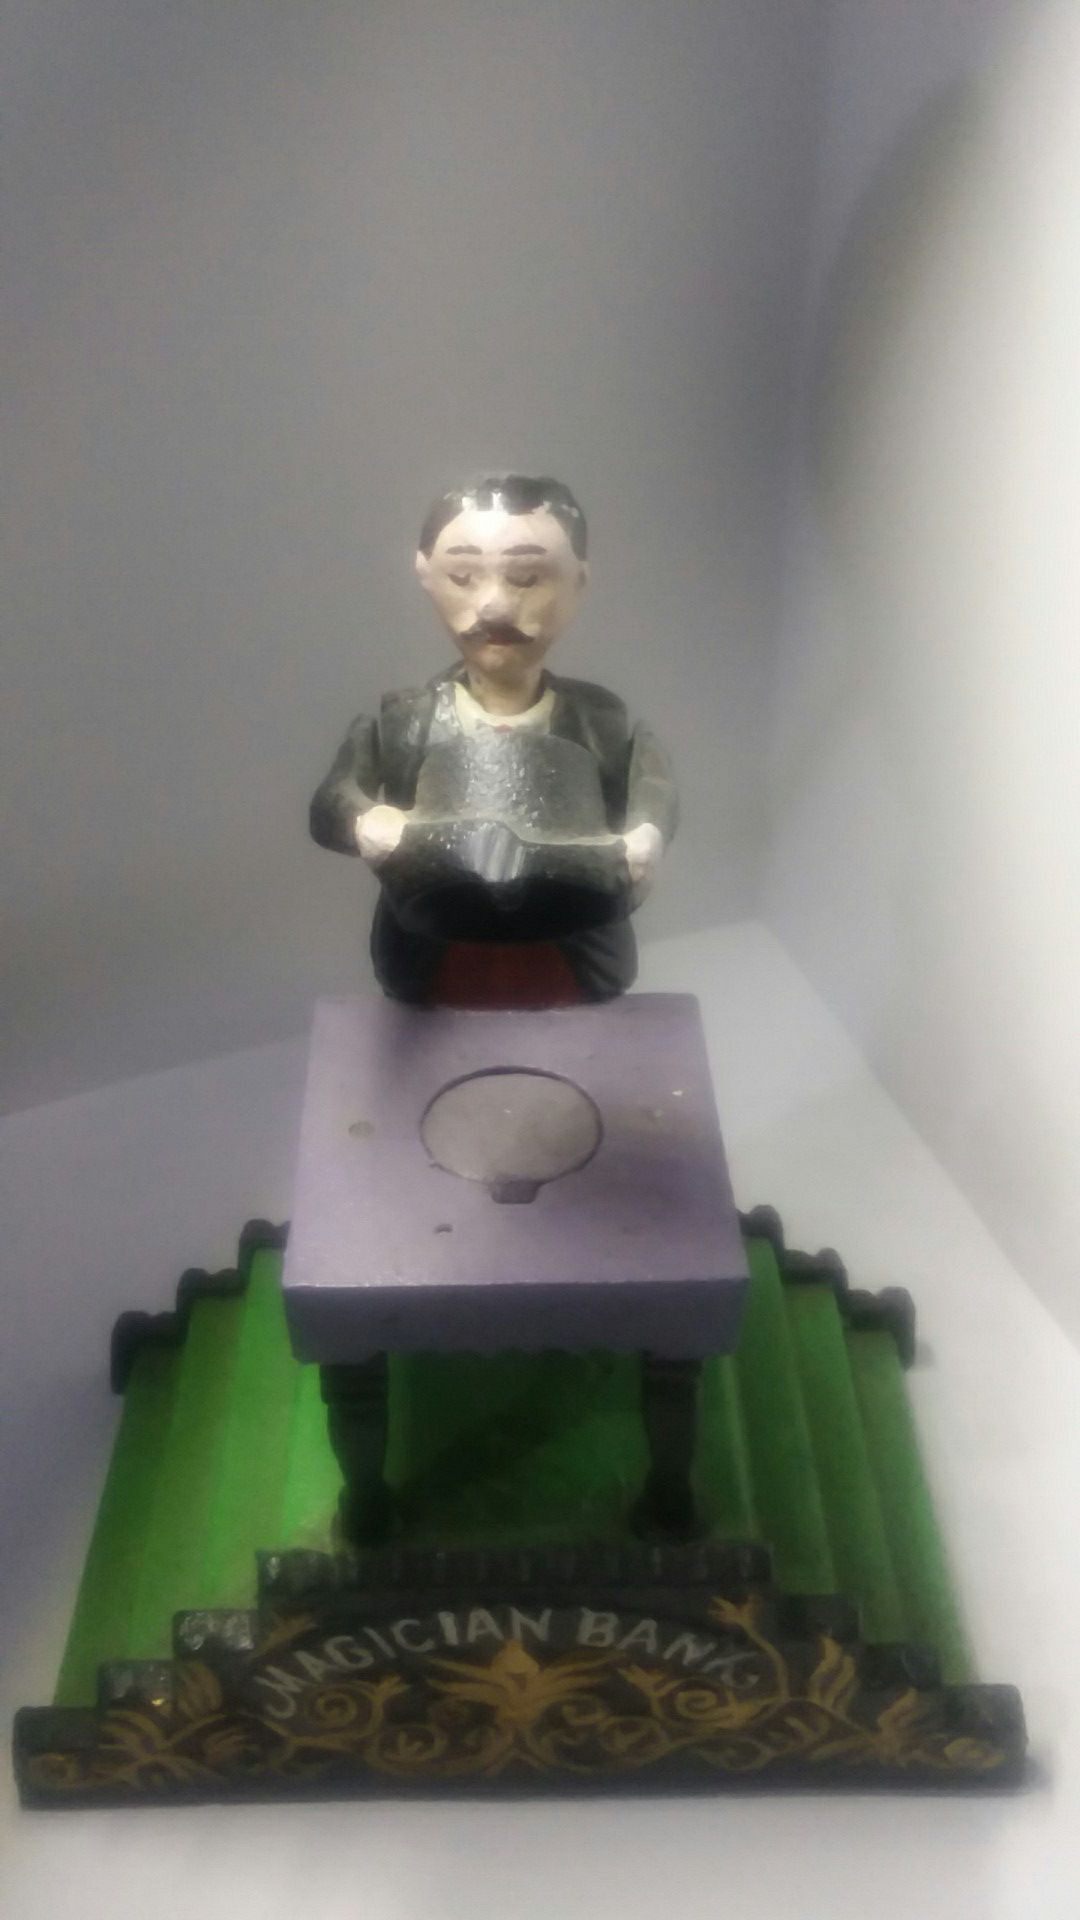 Vintage Magician Mechanical Bank from Book of Knowledge